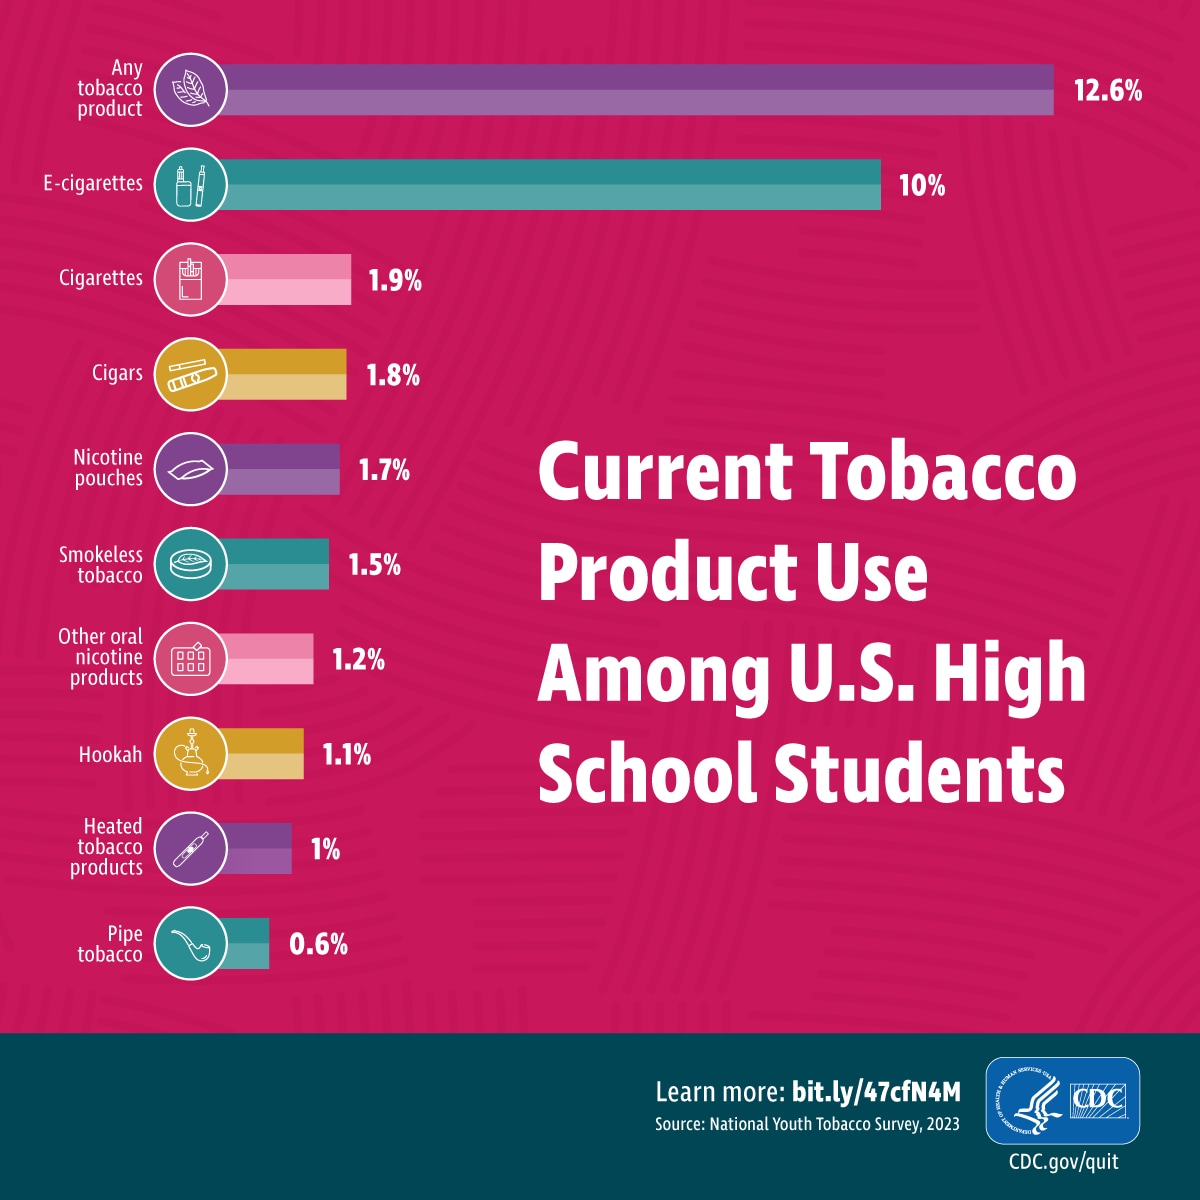 Current Tobacco Use among U.S. High School Students. Any tobacco product 12.6%, E-cigarettes 10%, Cigarettes 1.9%, Cigars 1.8%, Nicotine pouches 1.7%, Smokeless tobacco 1.5%, Other oral nicotine products 1.2%, Hookah 1.1%, Heated tobacco products 1%, Pipes 0.6%